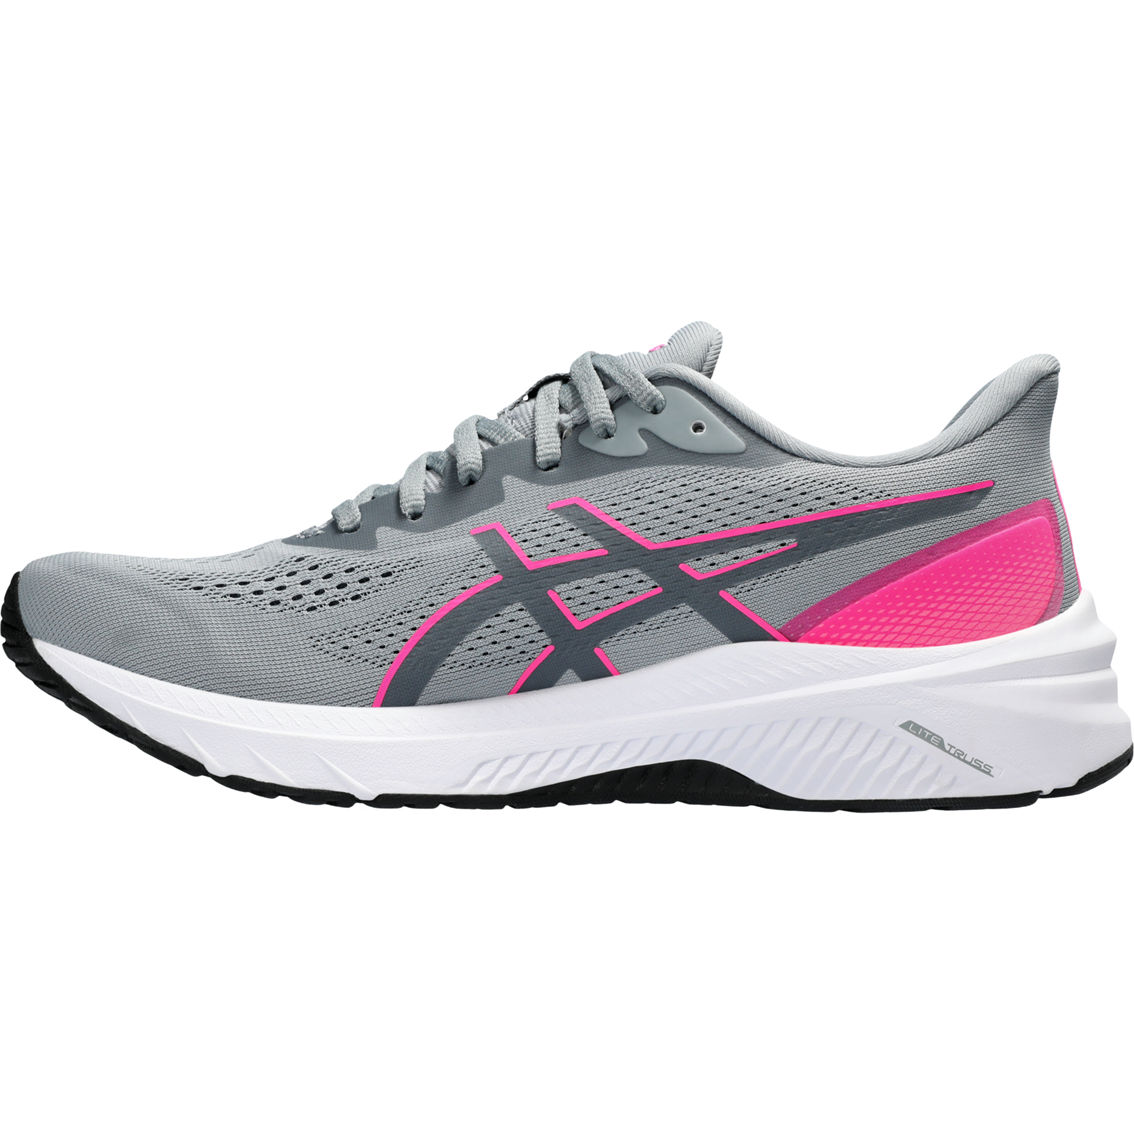 ASICS Women's GT-1000 12 Running Shoes - Image 2 of 5